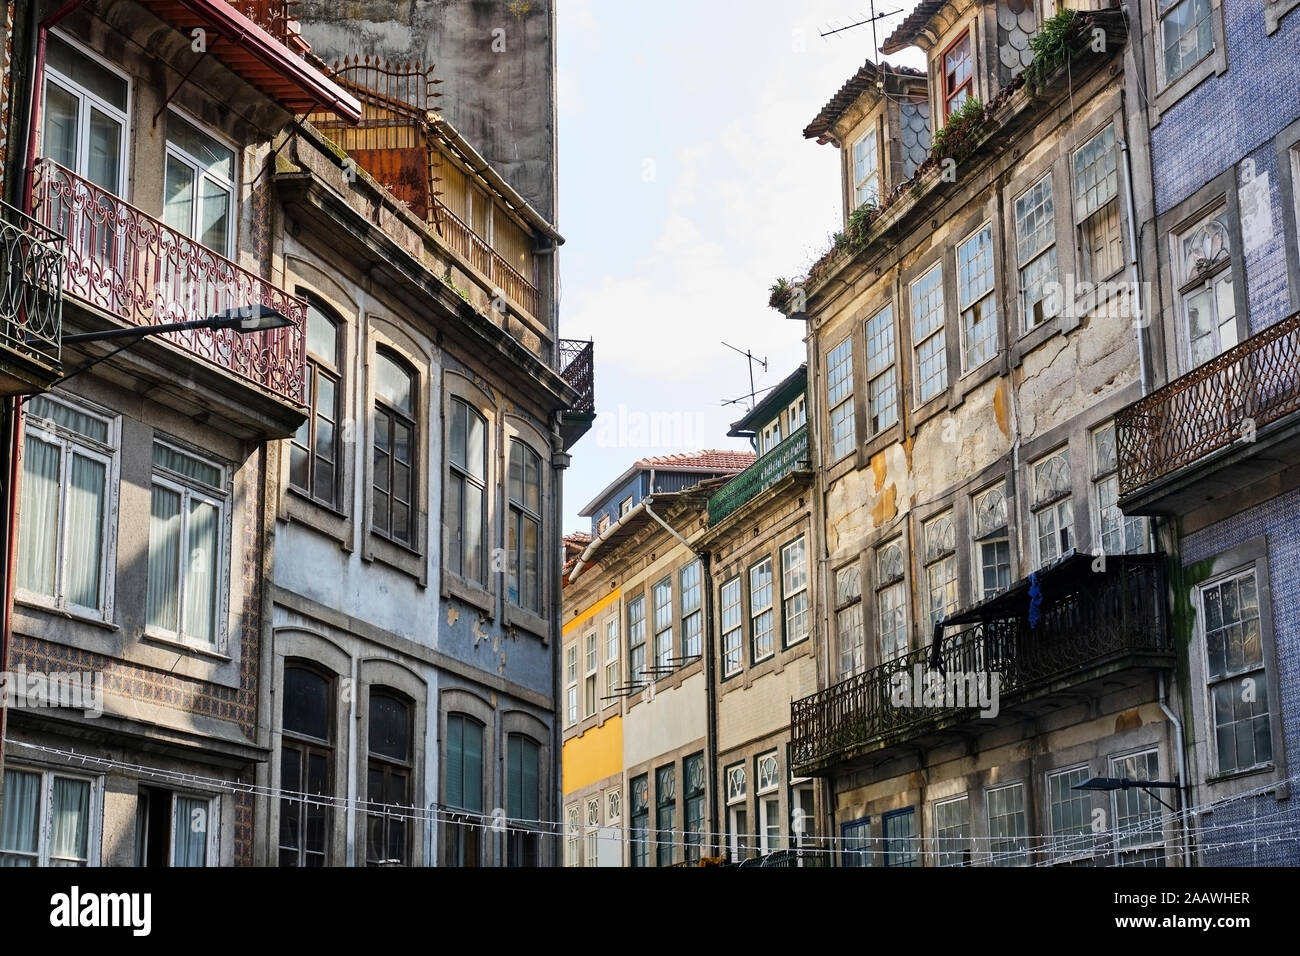 Portugal, Porto, Windows and balconies of old residential buildings Stock Photo